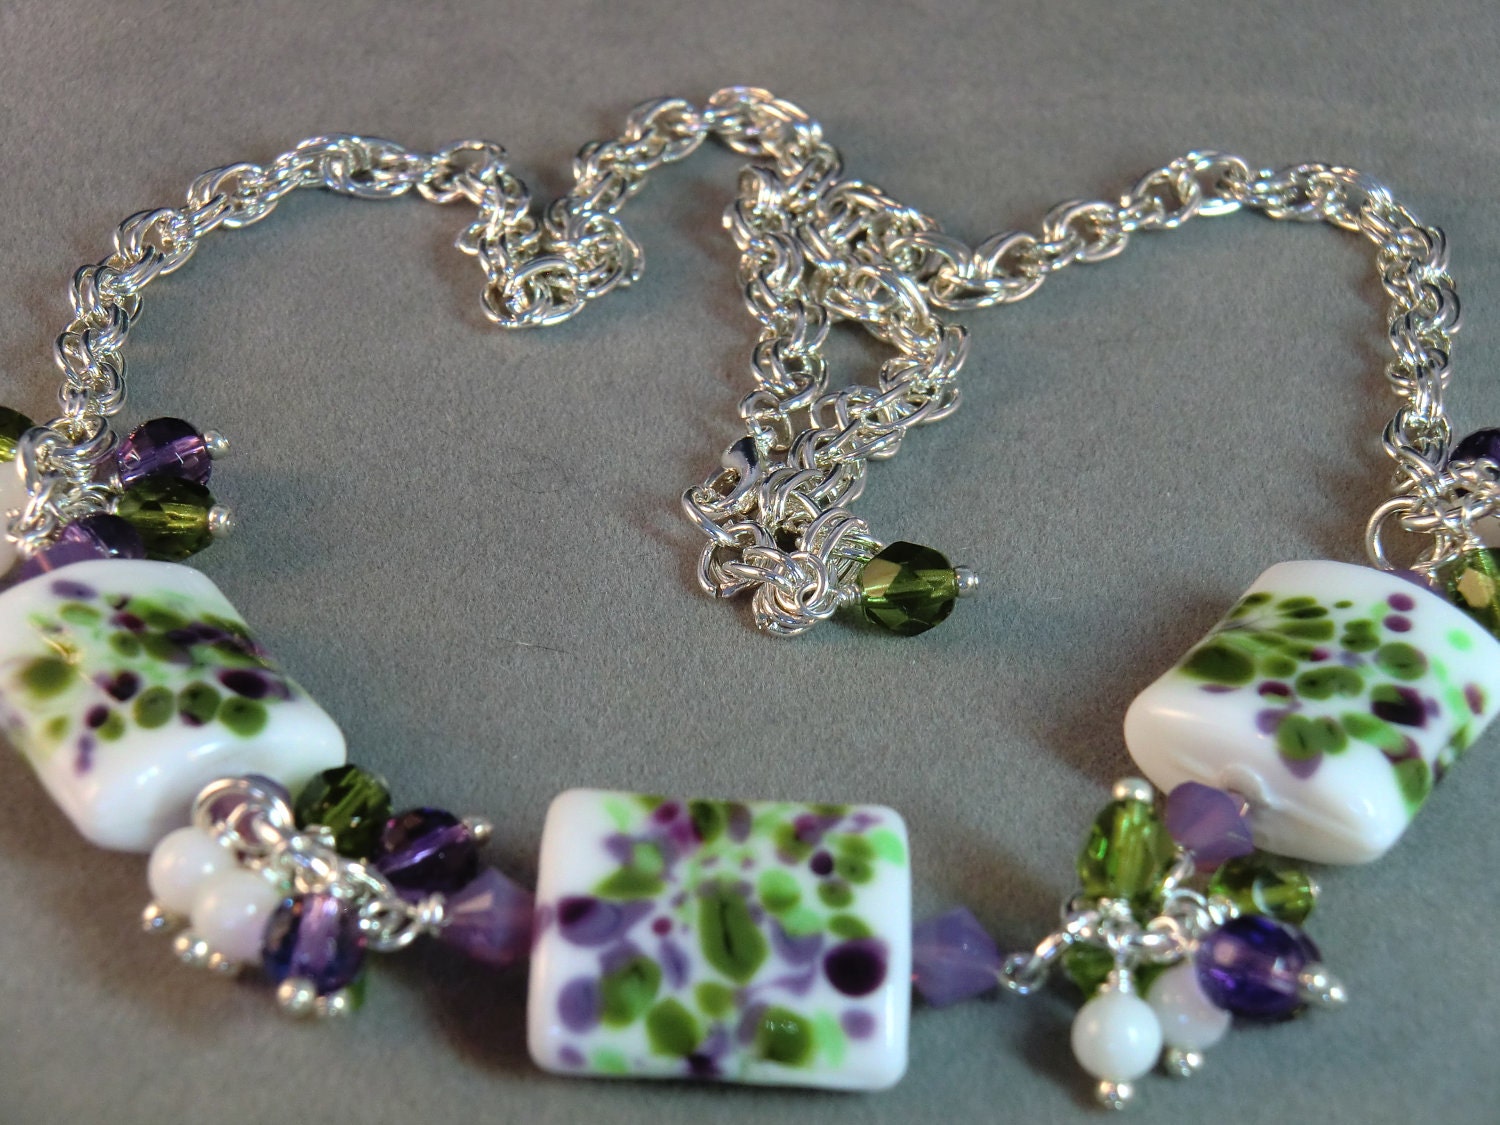 Green and purple Monet's Garden lampwork necklace in white and silver, purple, green, and white lampwork necklace - wilywolverine